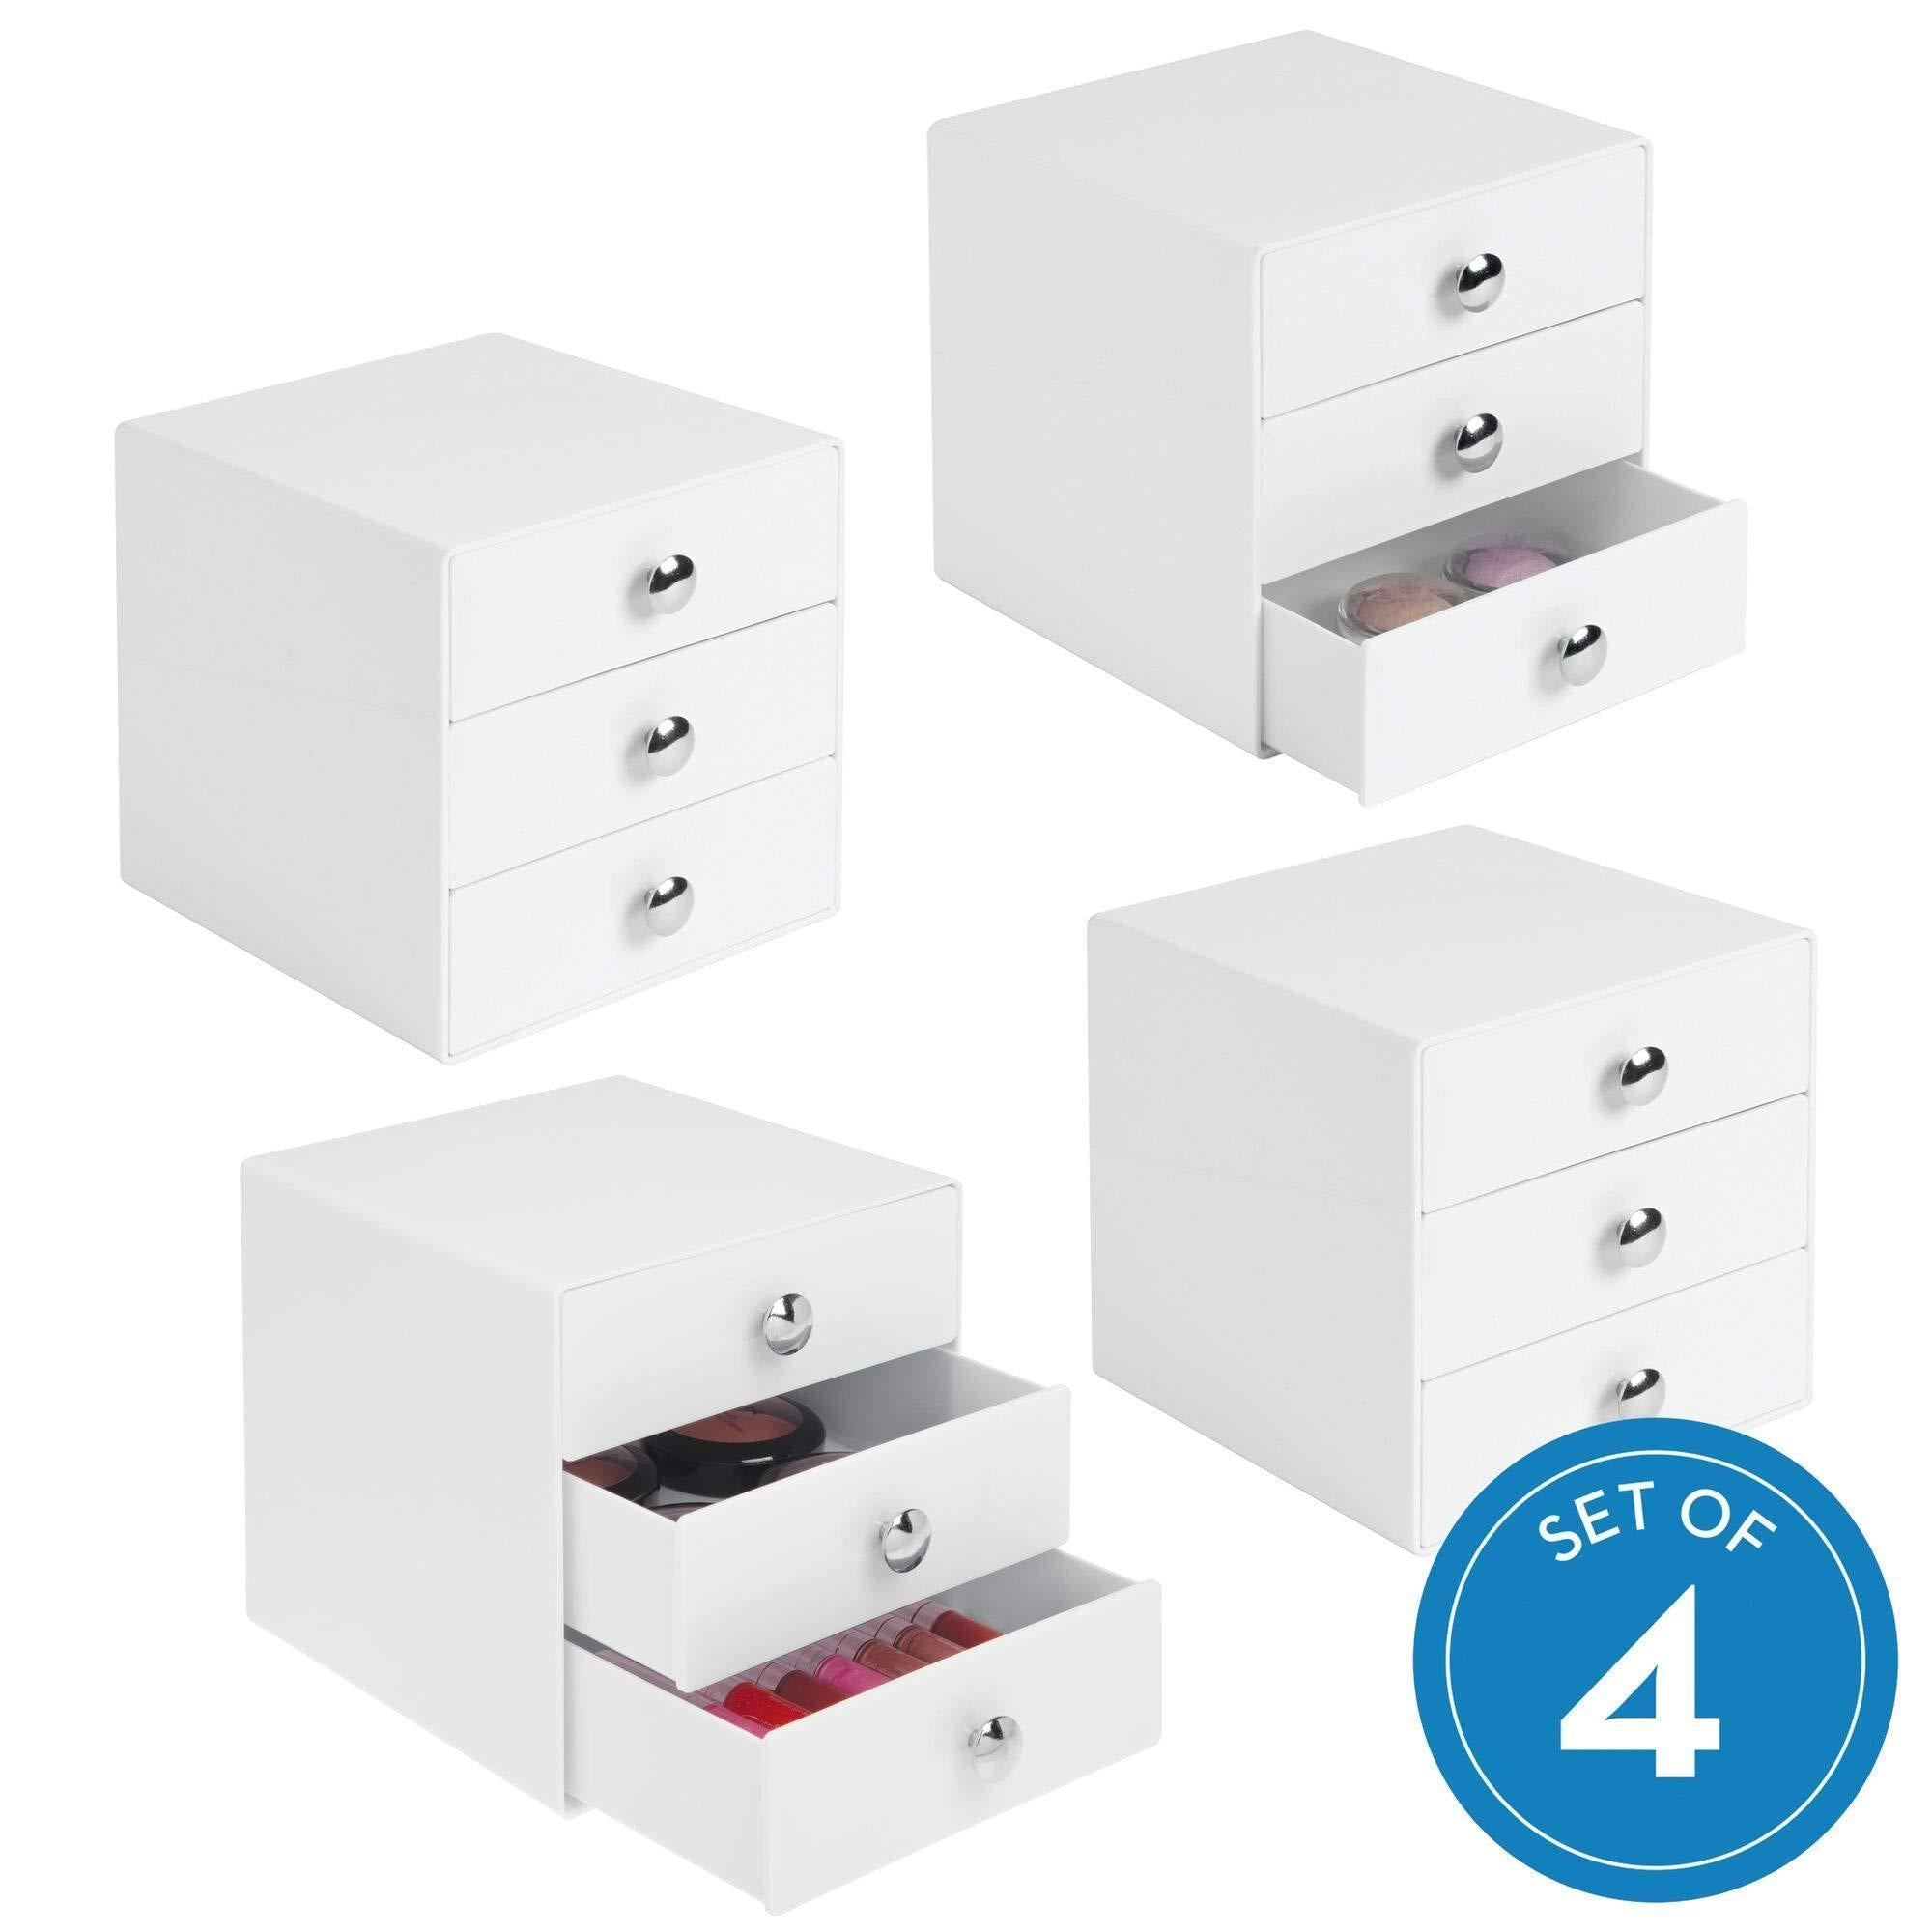 iDesign Plastic 3 Jewelry Box, Compact Storage Organization Drawers Set for Cosmetics, Makeup, Hair Care, Bathroom, Office, Dorm, Desk, Countertop, 6.5" x 6.5" x 6.5", Set of 4, White